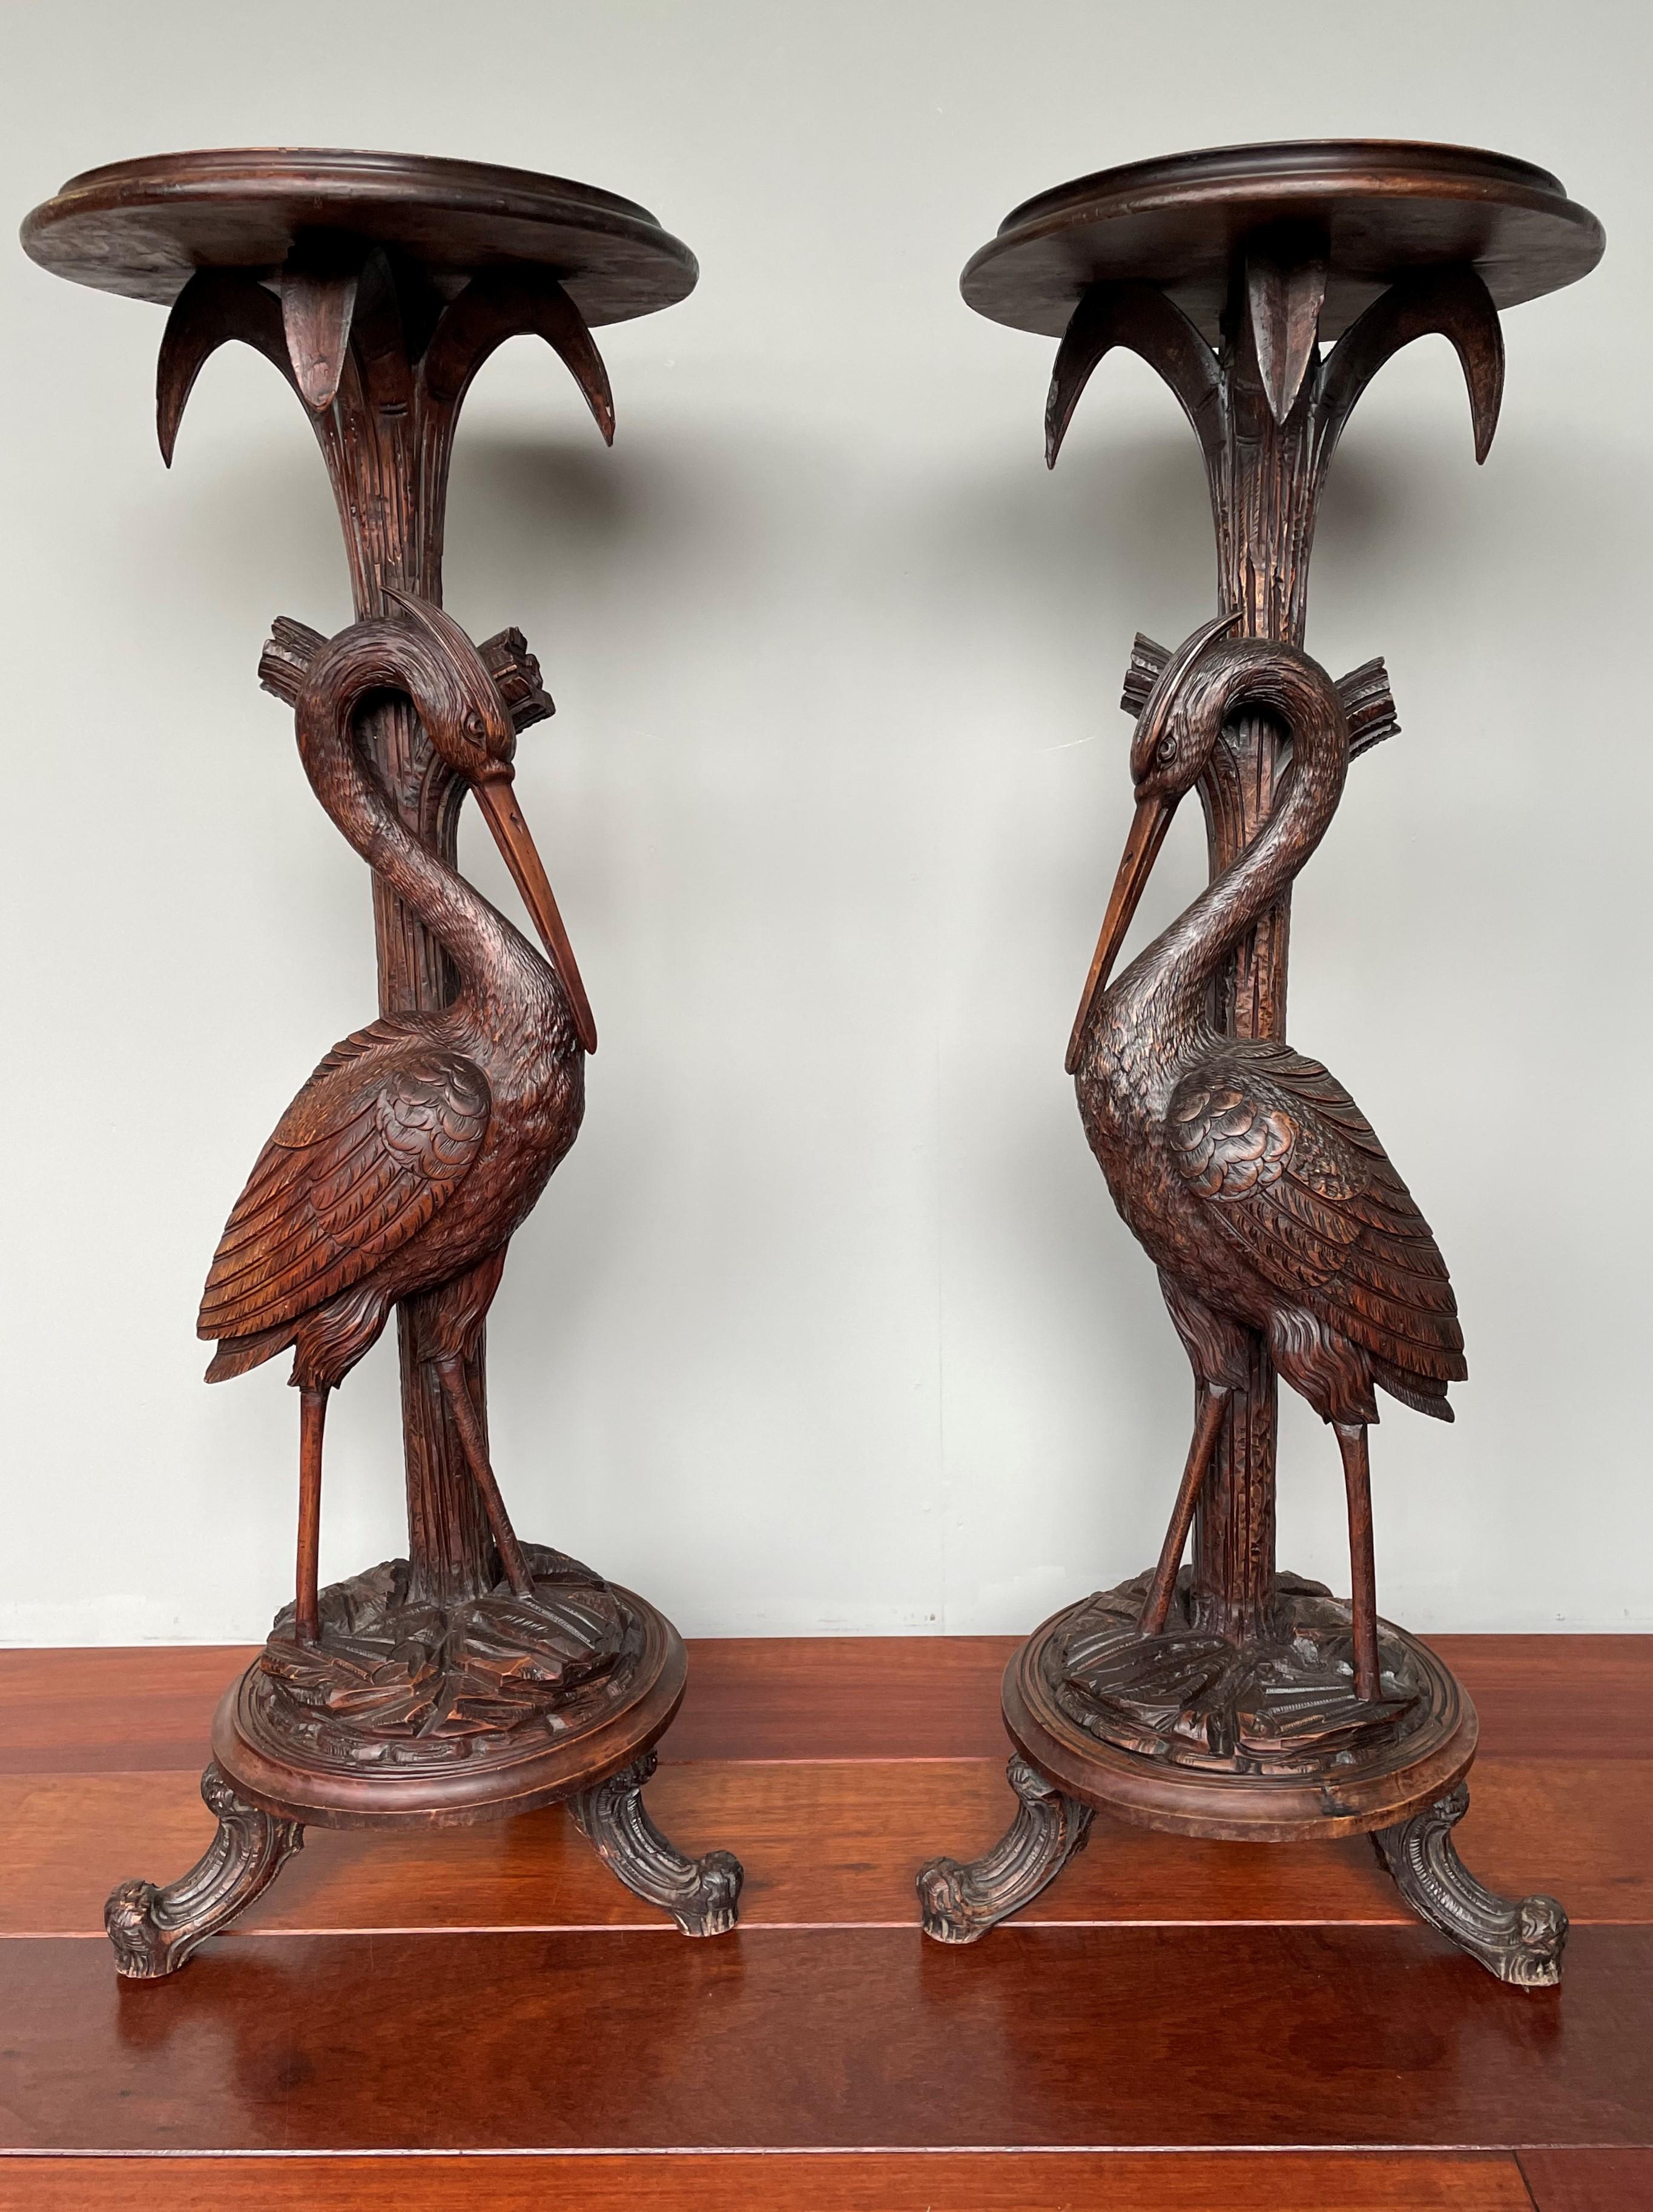 Rare, meaningful and highly decorative pair of pedestals from the 1800s.

One of the reasons why we almost always prefer antiques over modern day pieces is that antiques very often also have a deeper meaning. One that teaches us, or helps us not to